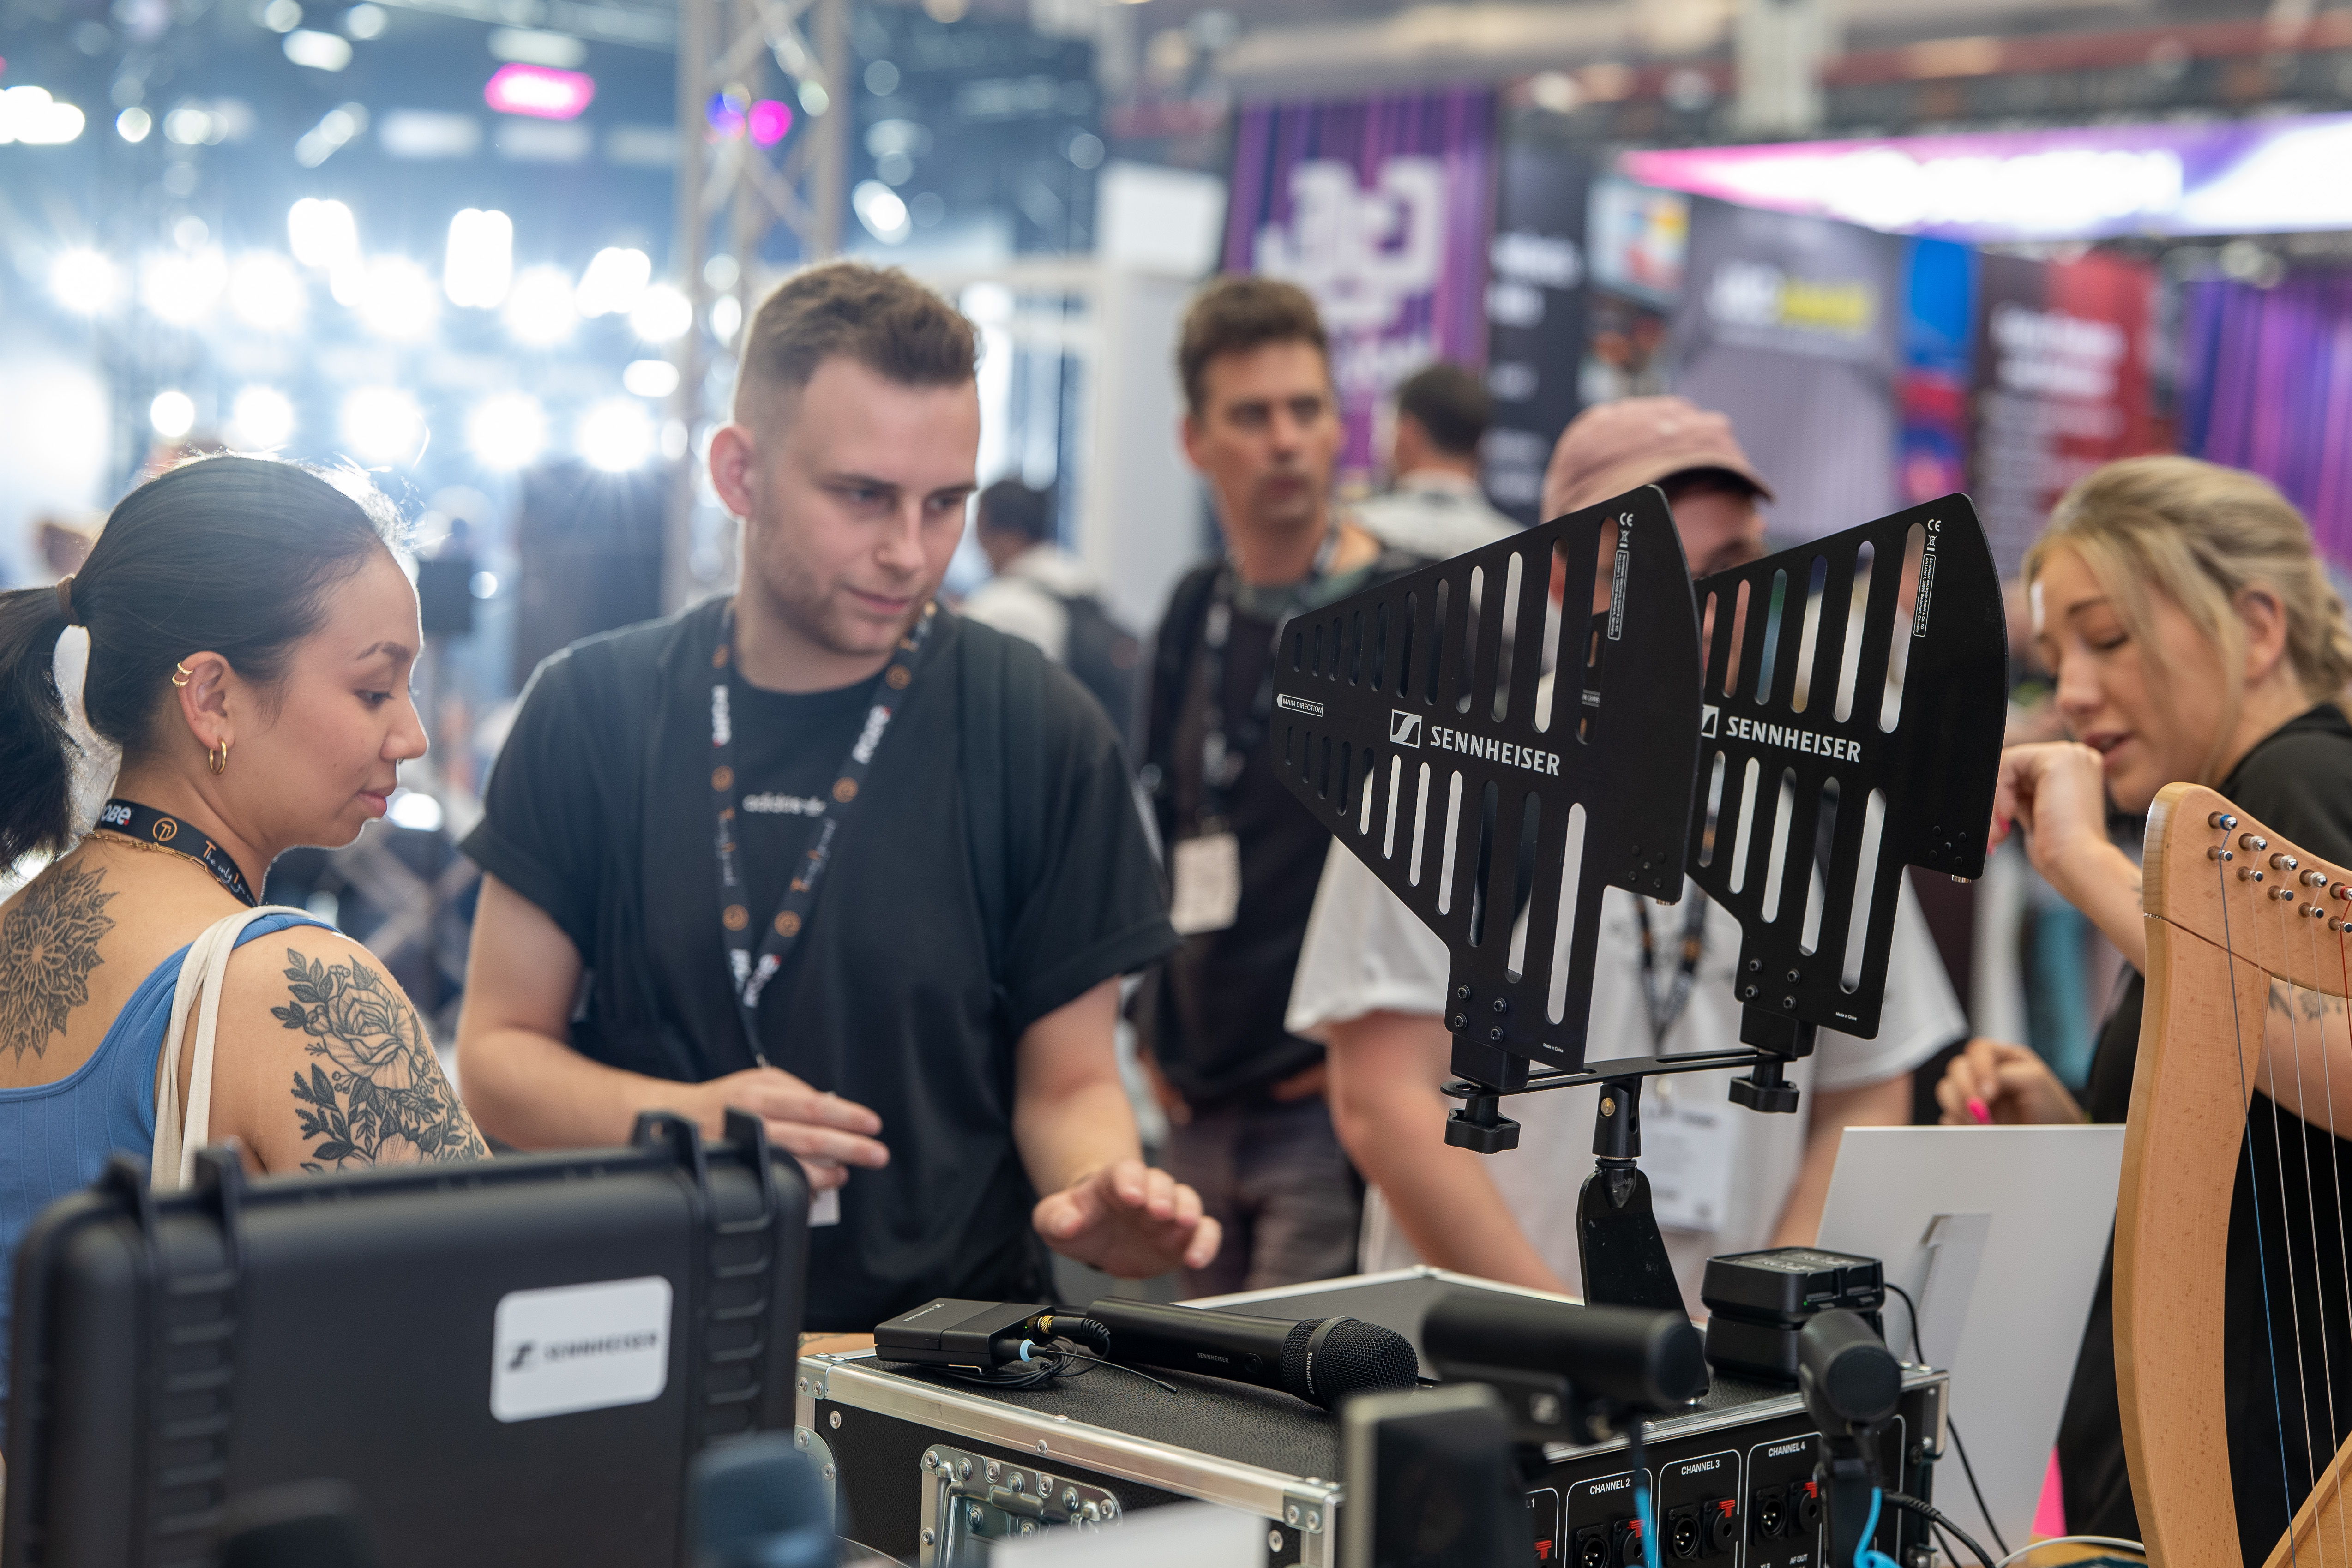 Sennheiser's team of experts will be readily available to guide show visitors through their impressive line-up of Sennheiser and Neumann latest offerings